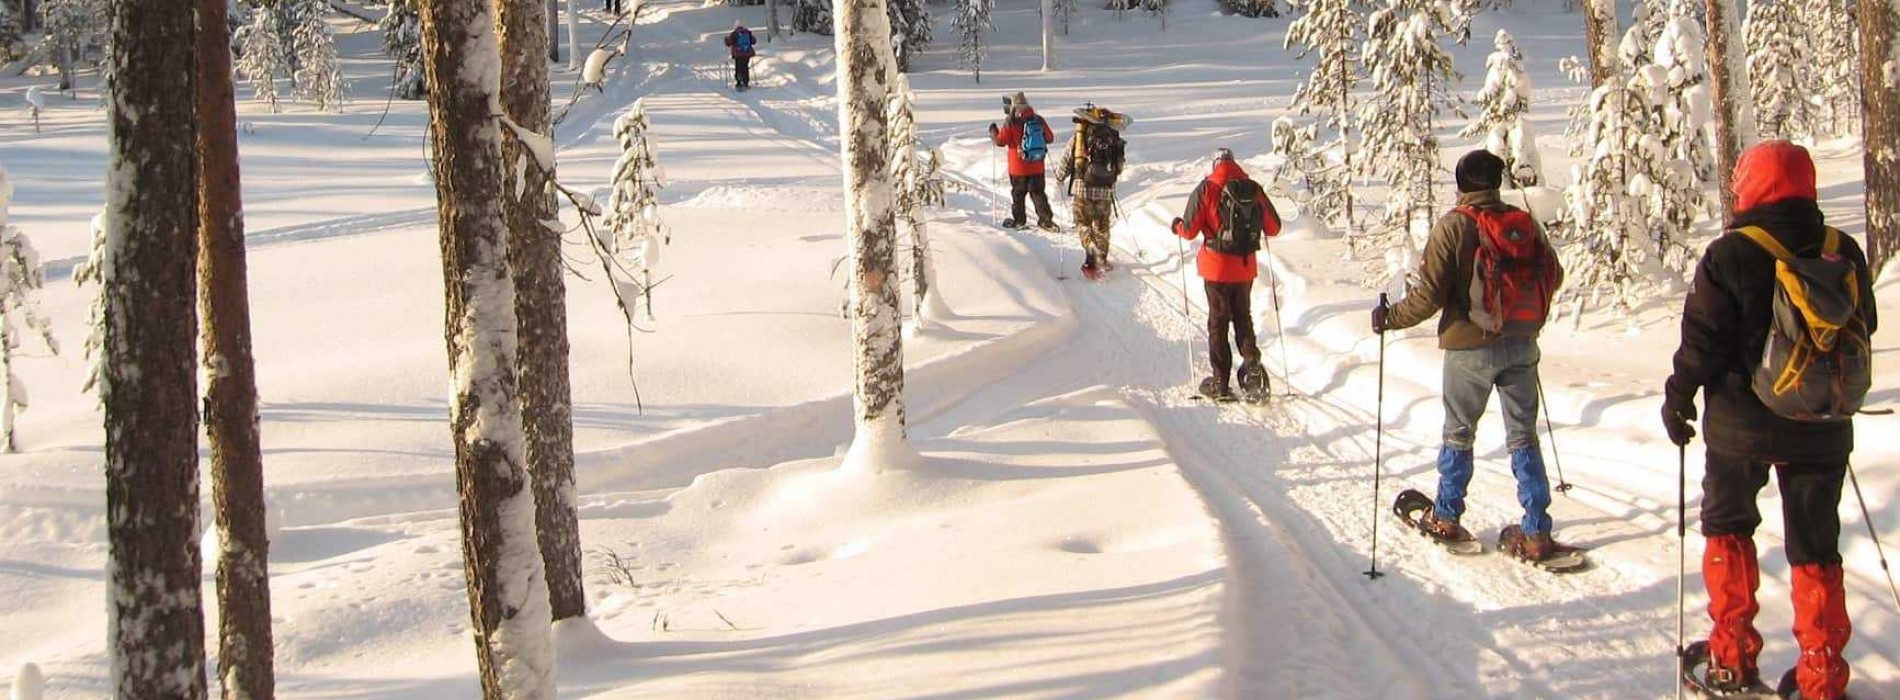 Snowshoeing in forest